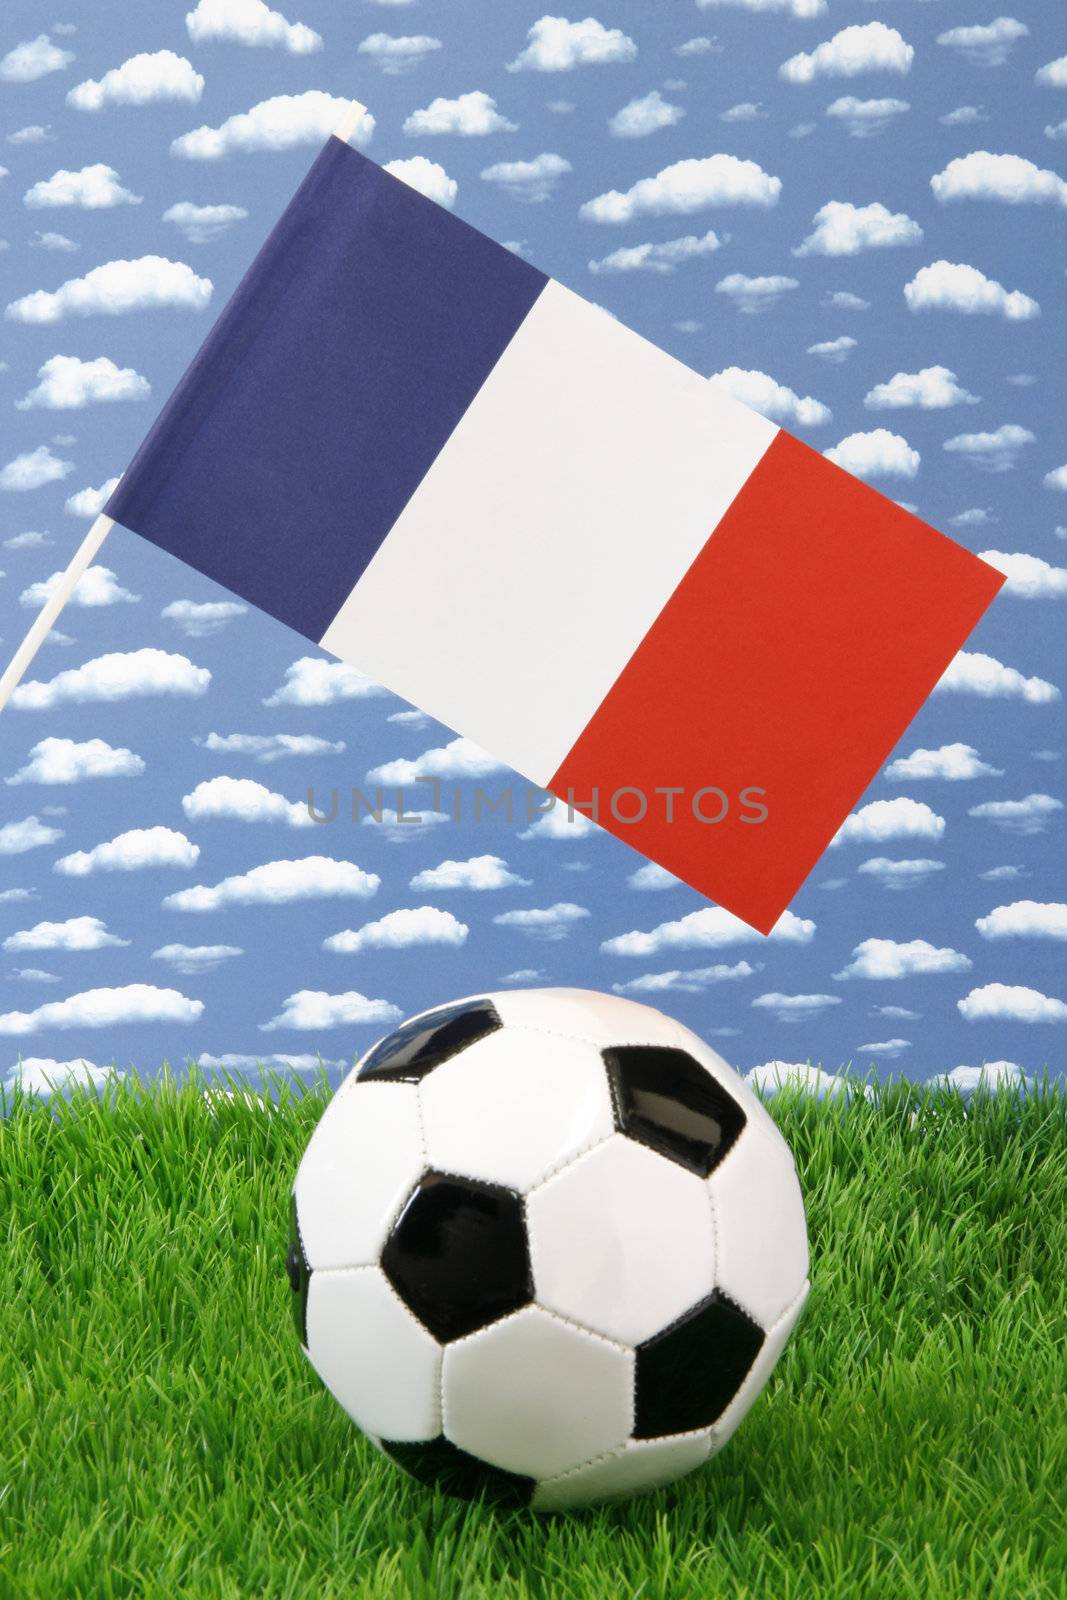 Soccerball on grass with french national flag over sky background